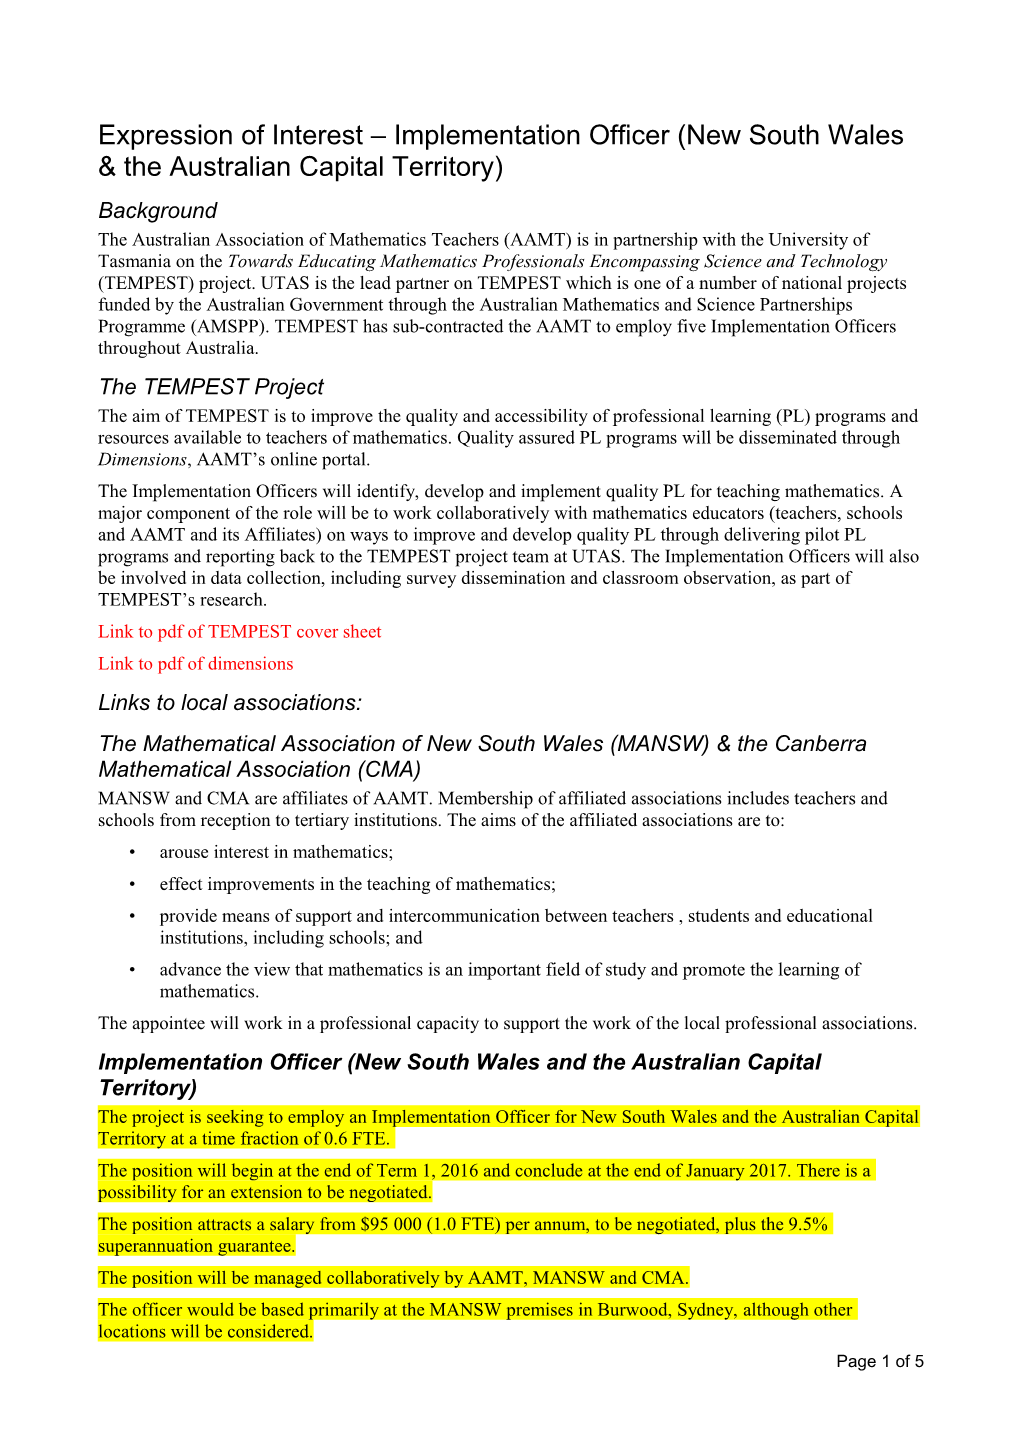 Expression of Interest Implementation Officer (New South Wales & the Australian Capital